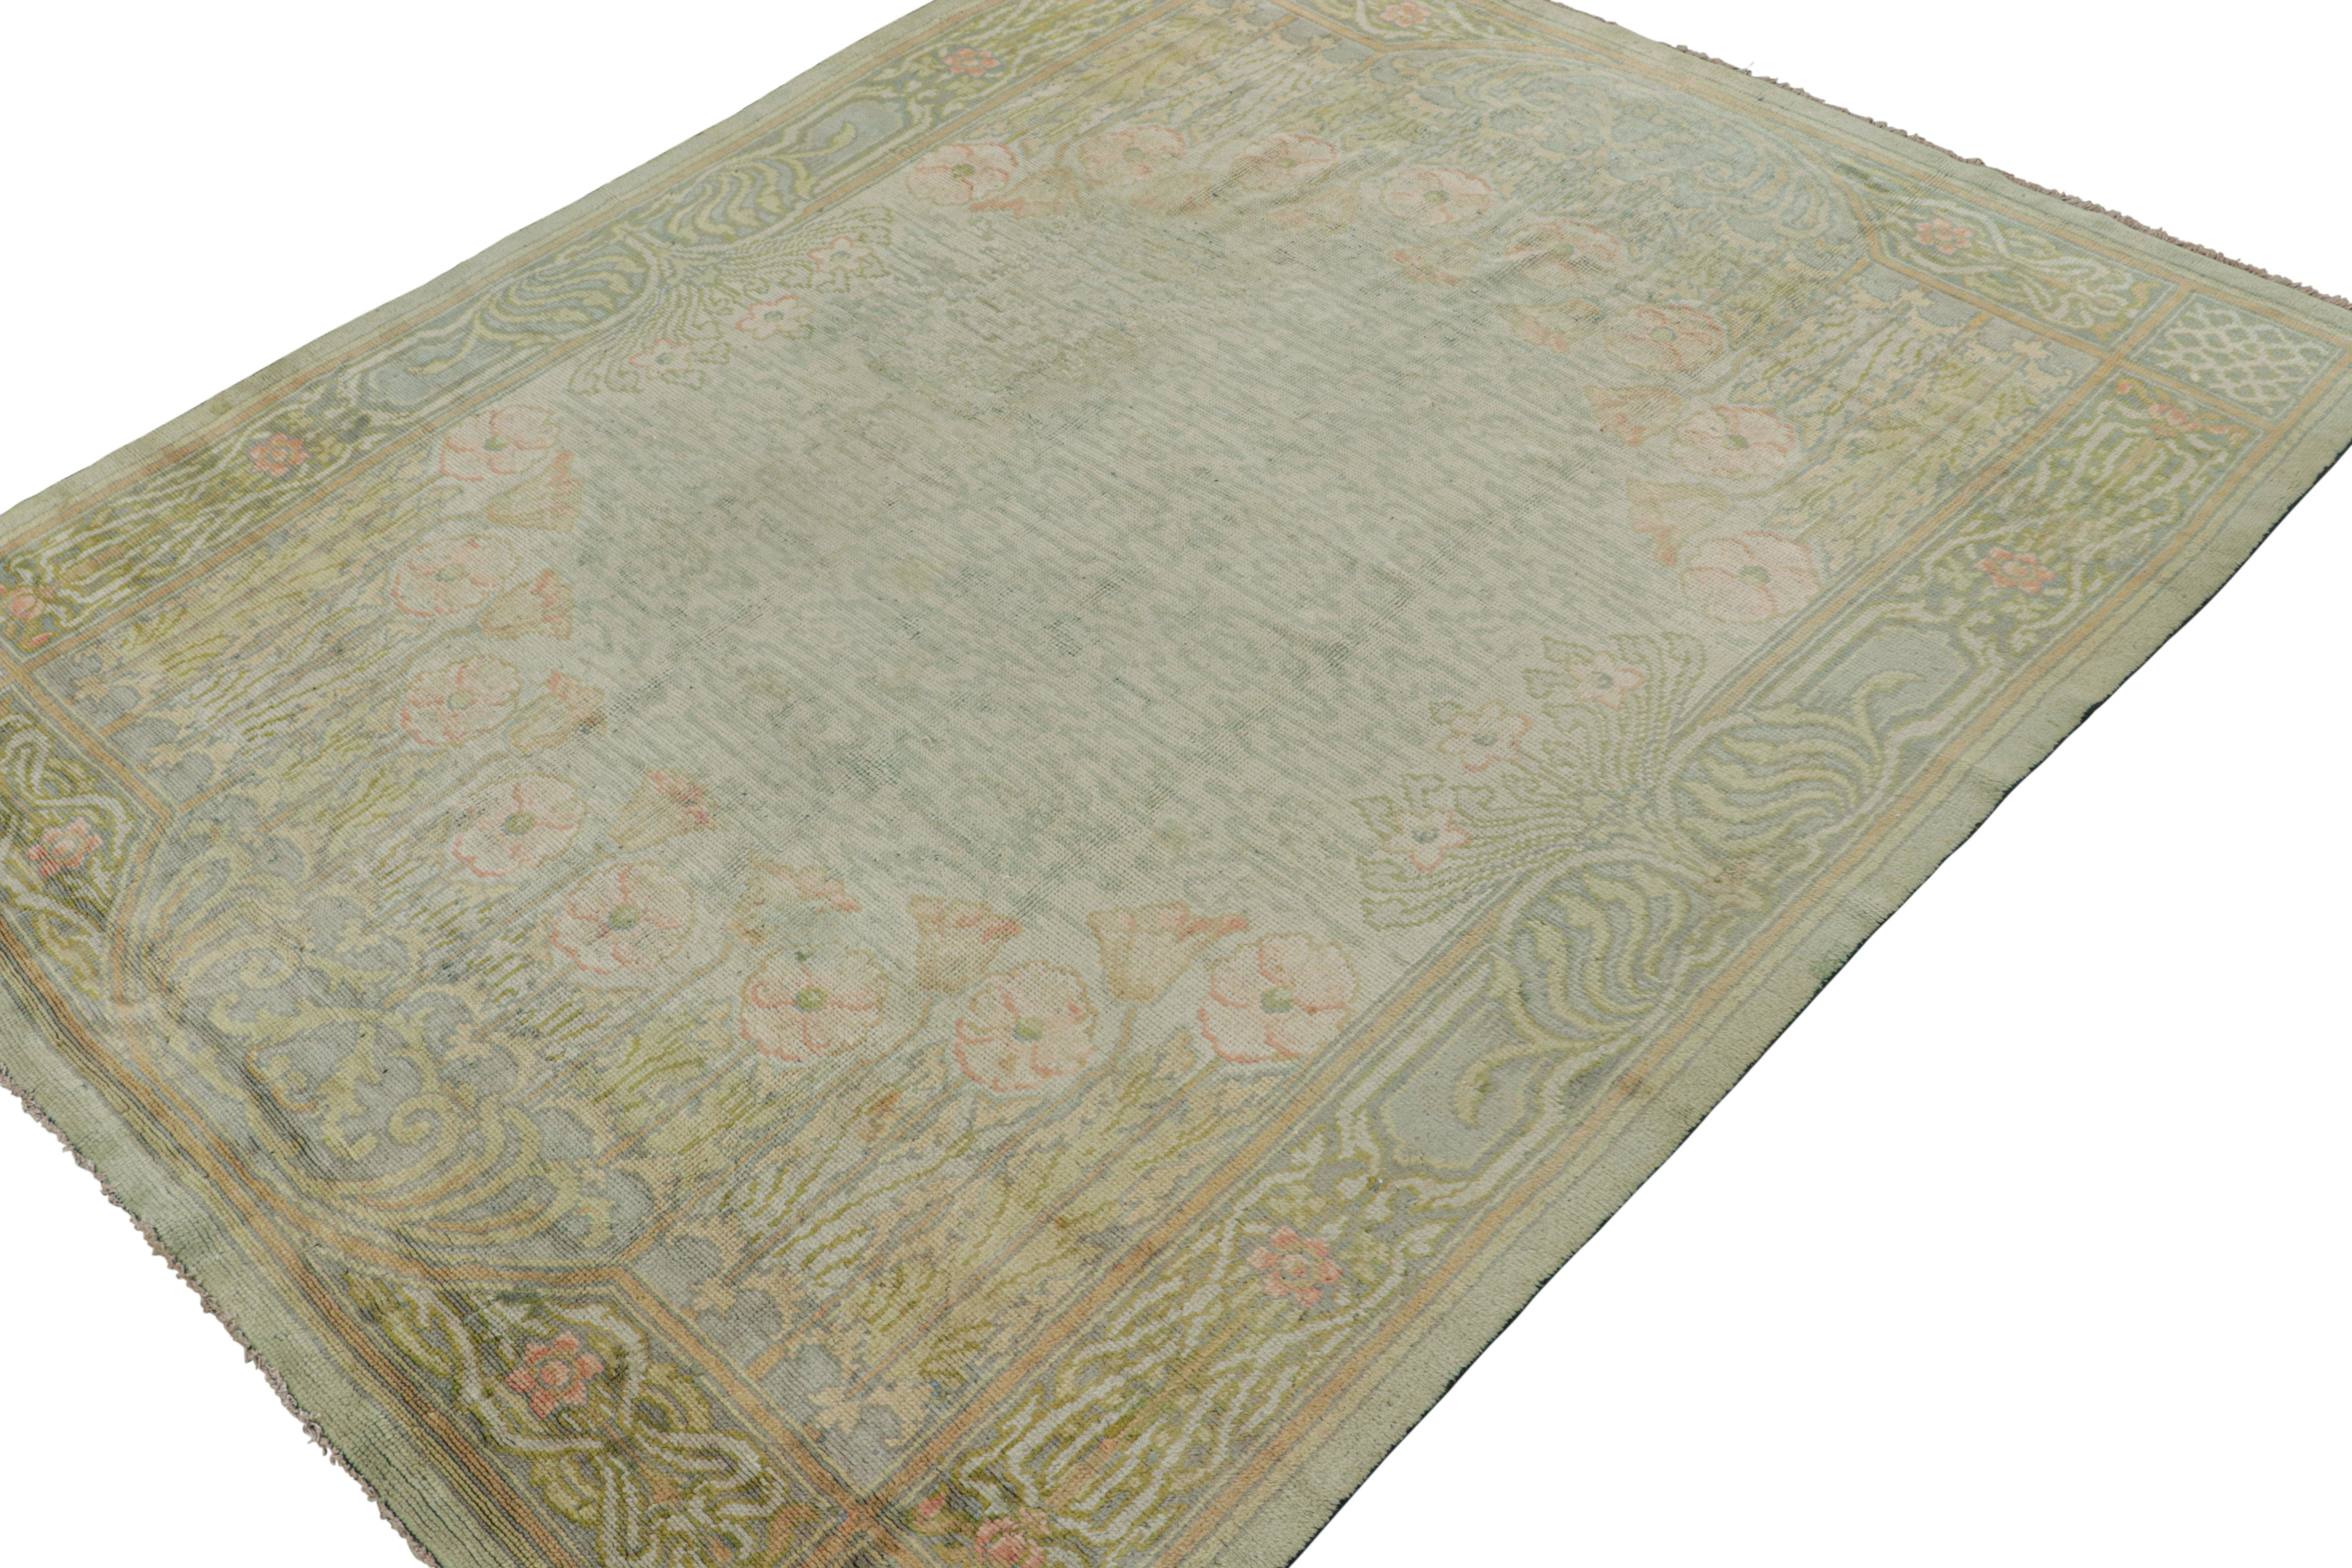 Irish Antique Voysey Arts & Crafts Rug in Green with Floral Patterns For Sale